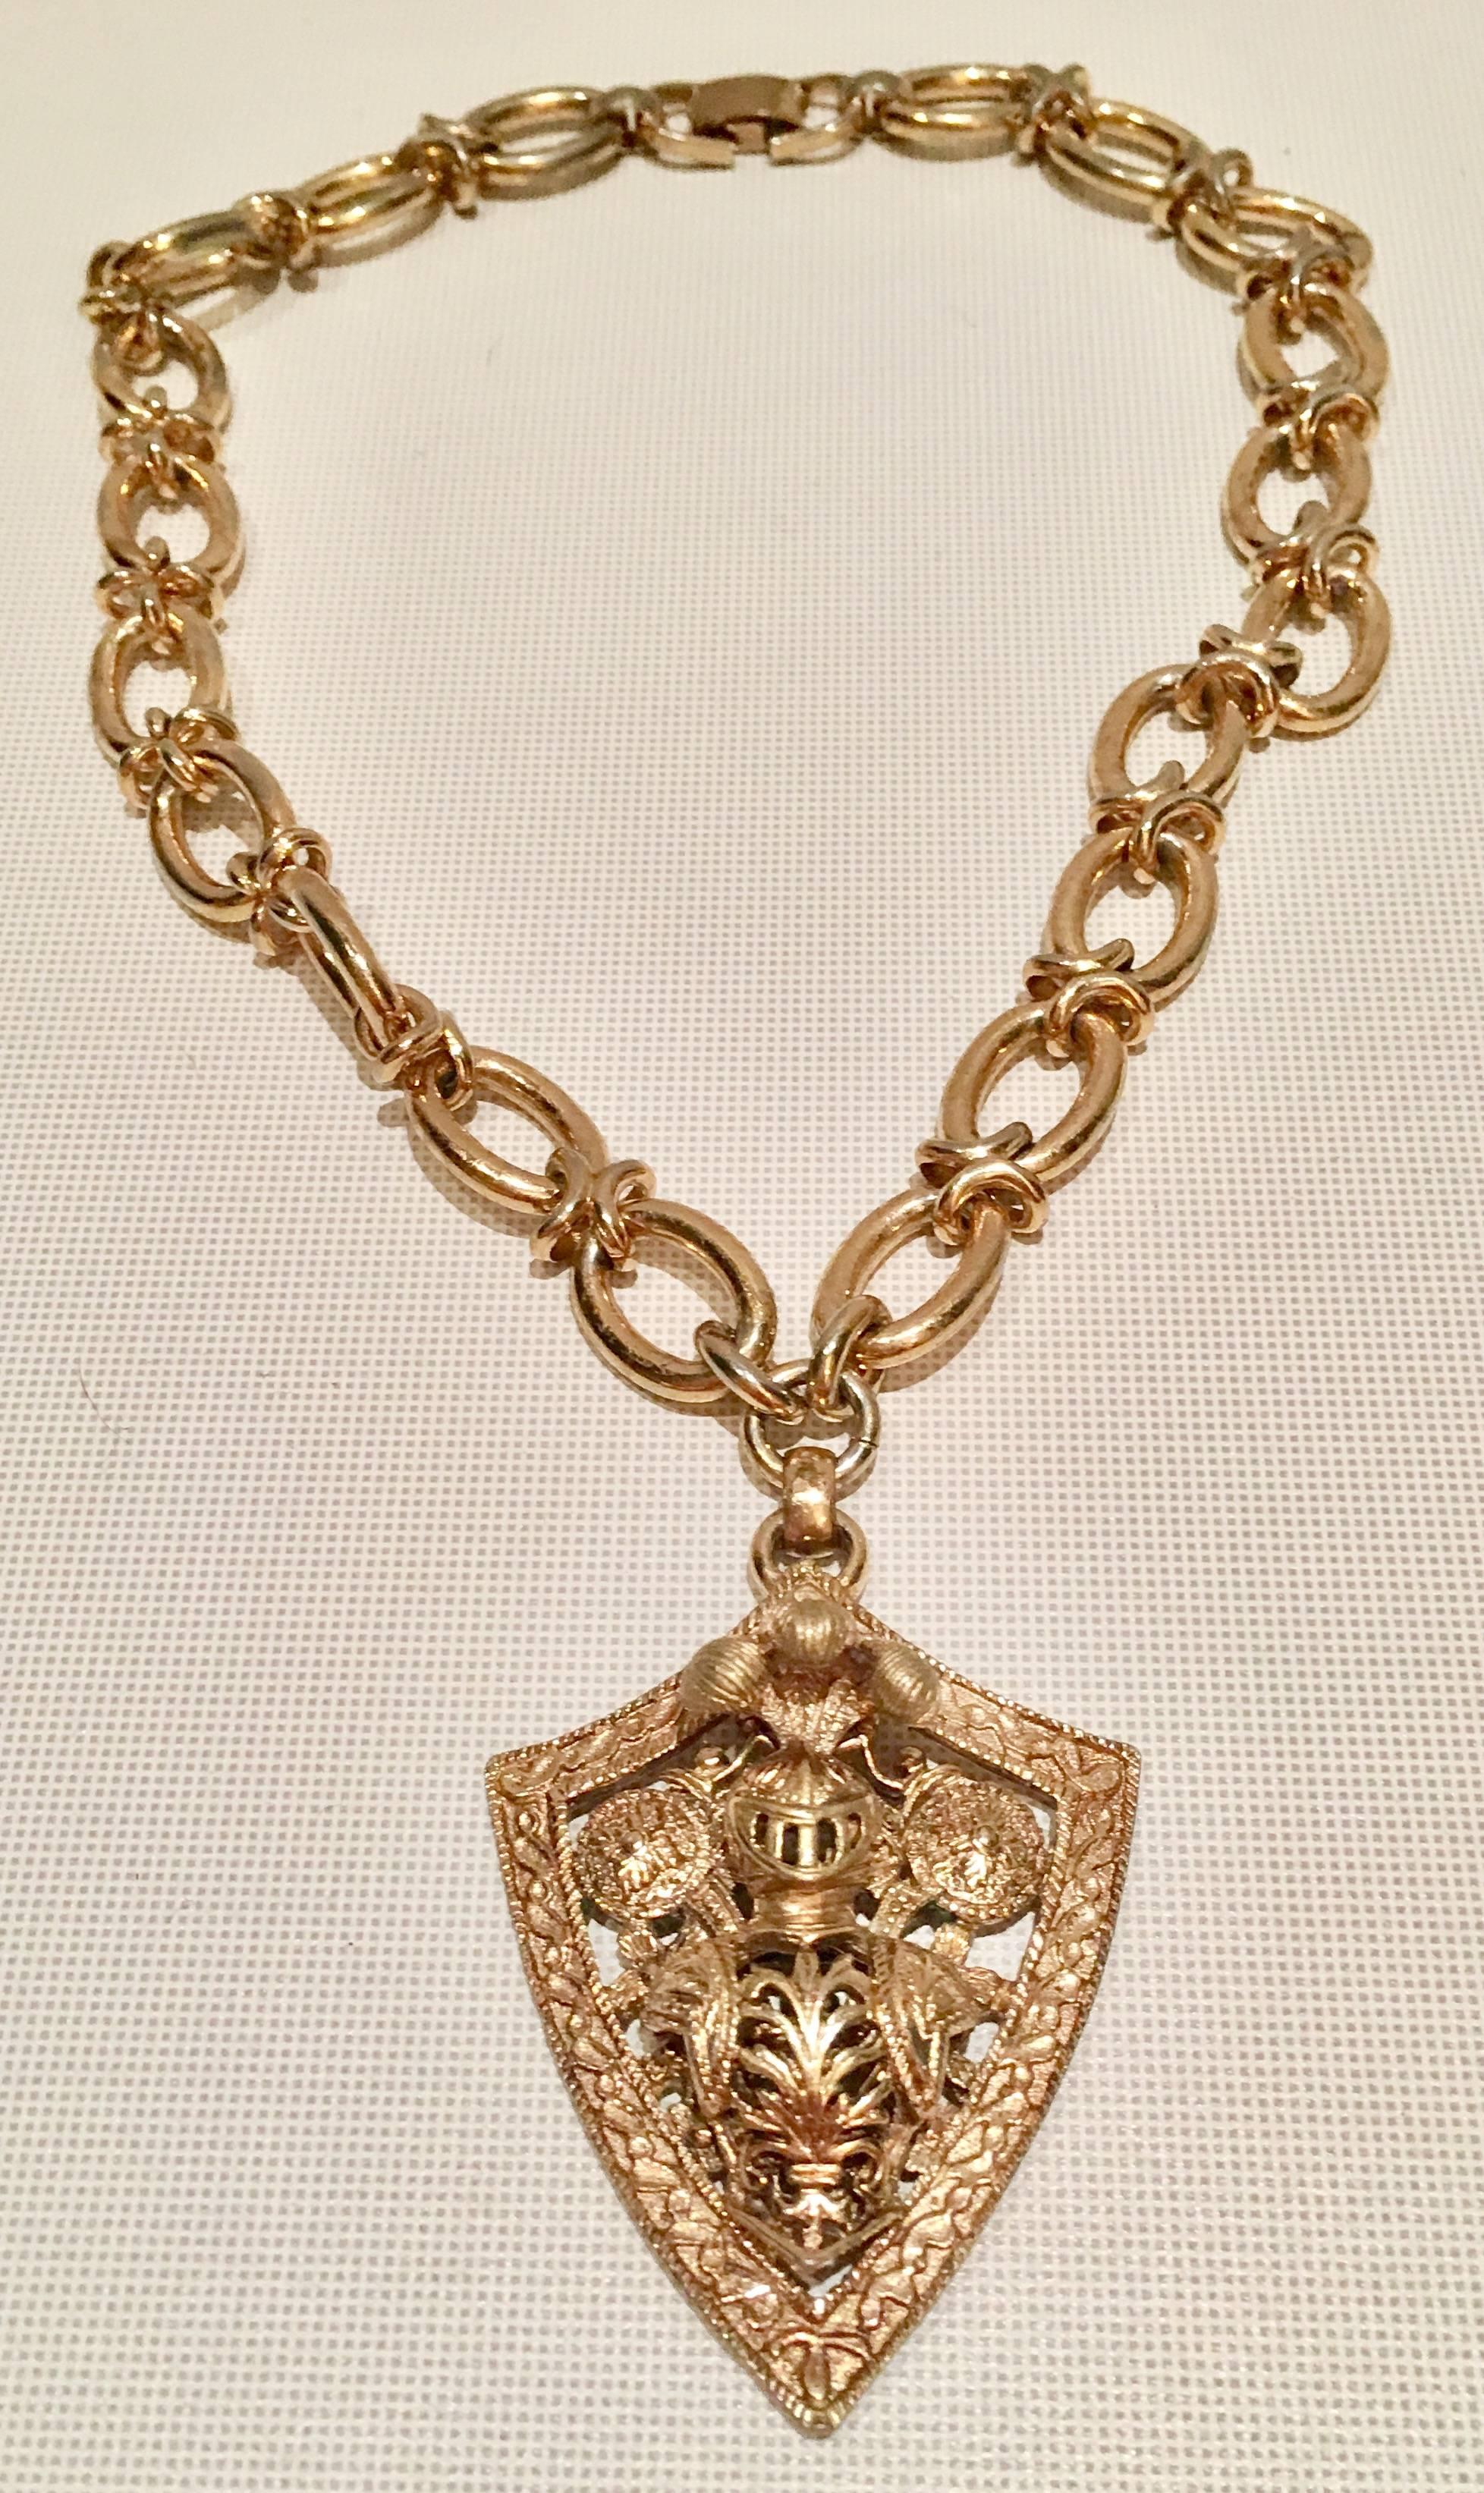 Fantastic three dimensional gold plate chunky chain necklace and knights shield pendant necklace signed. Bergere. Necklace with pendant measures 18